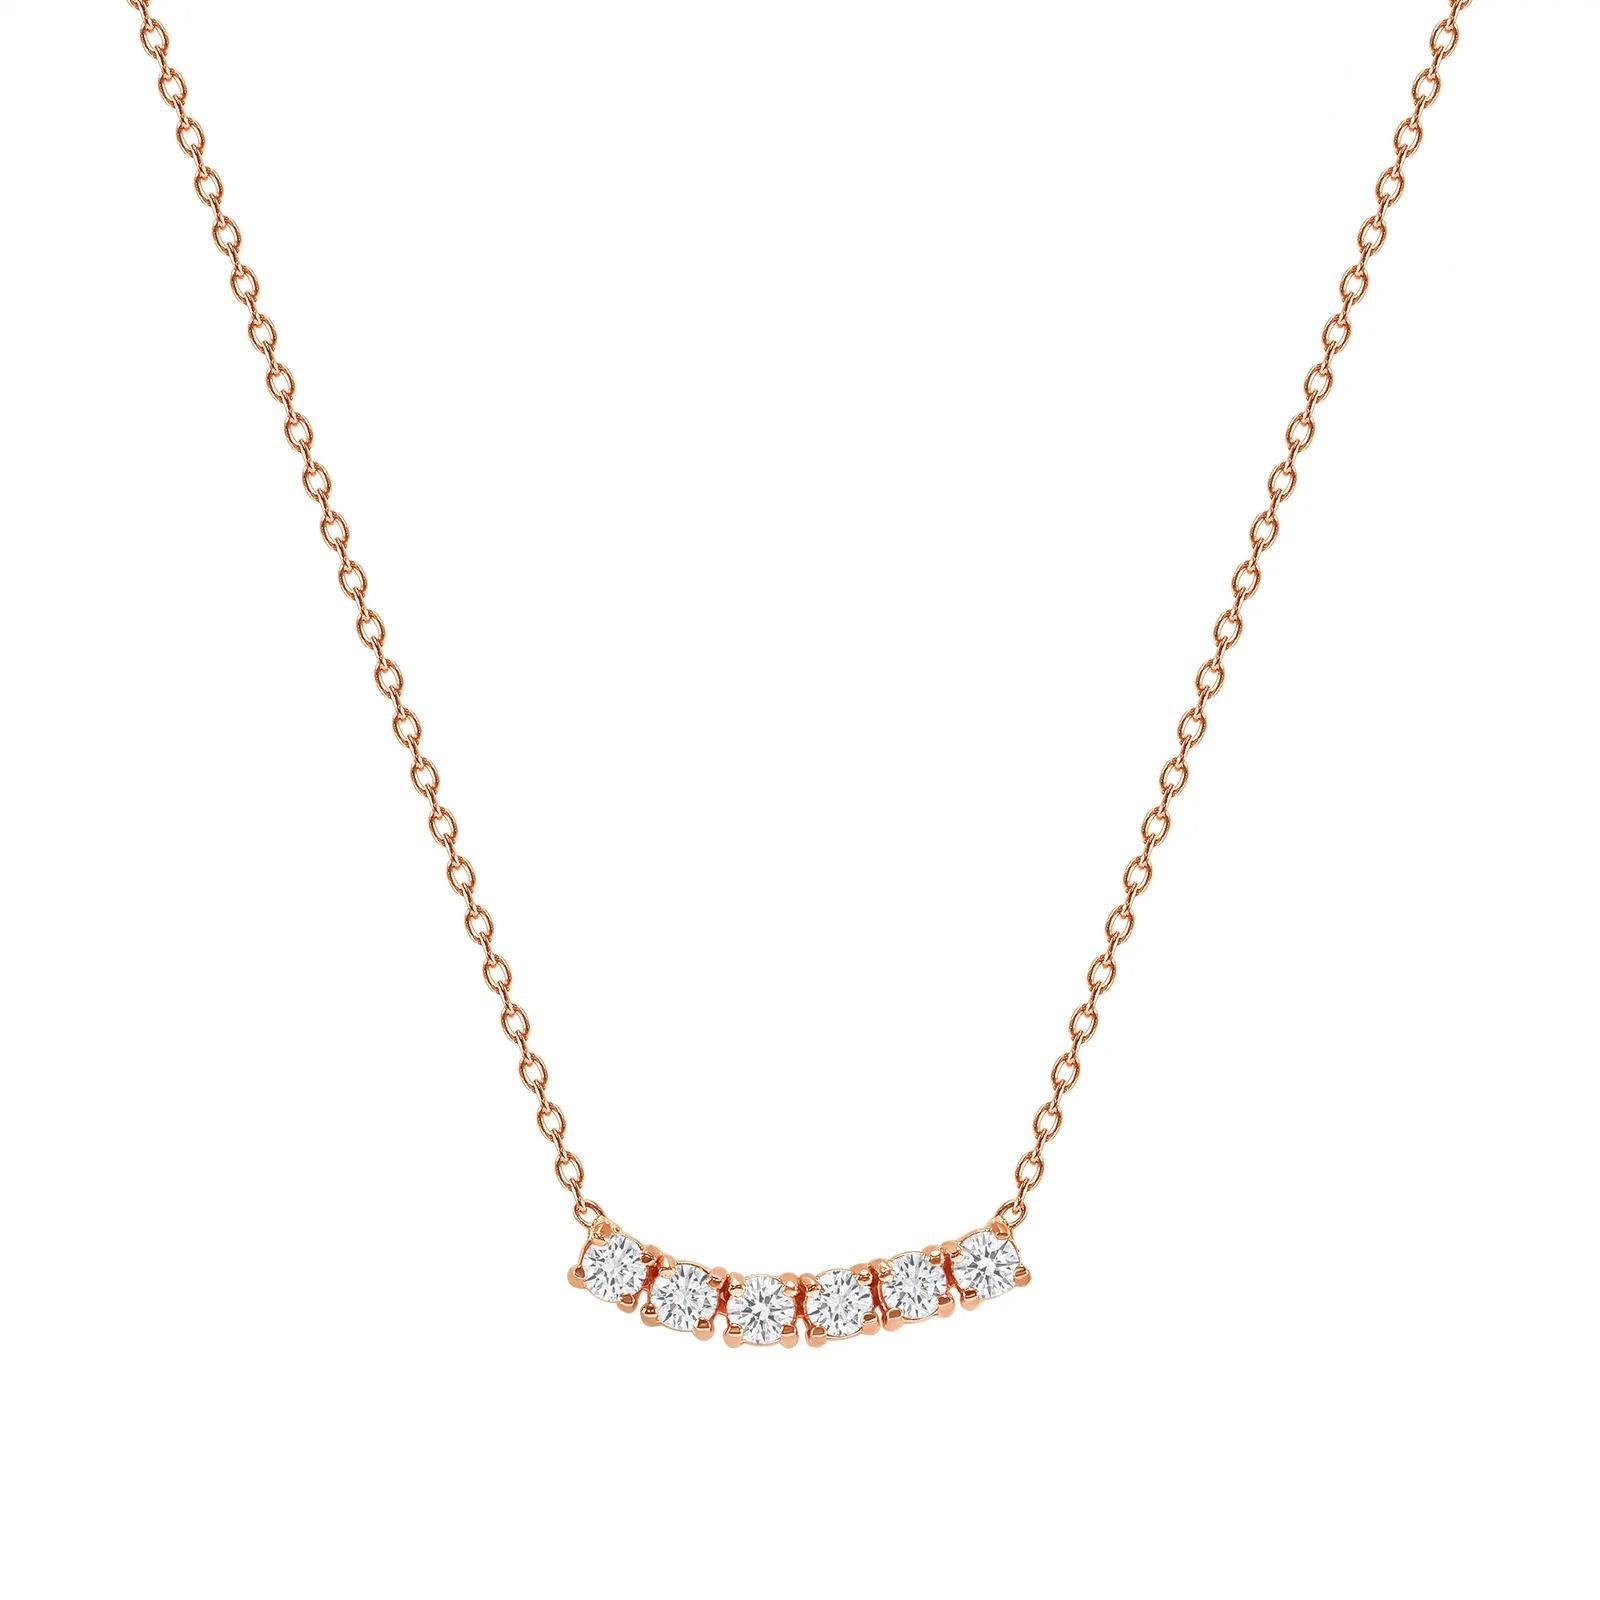 This petite, curved diamond necklace is crafted with gorgeous 14k gold set with six round diamonds.  

Gold: 14k 
Diamond Total Carats: 1.5 ct
Diamond Cut: Round (6 diamonds)
Diamond Clarity: VS
Diamond Color: F
Color: Rose Gold
Necklace Length: 22